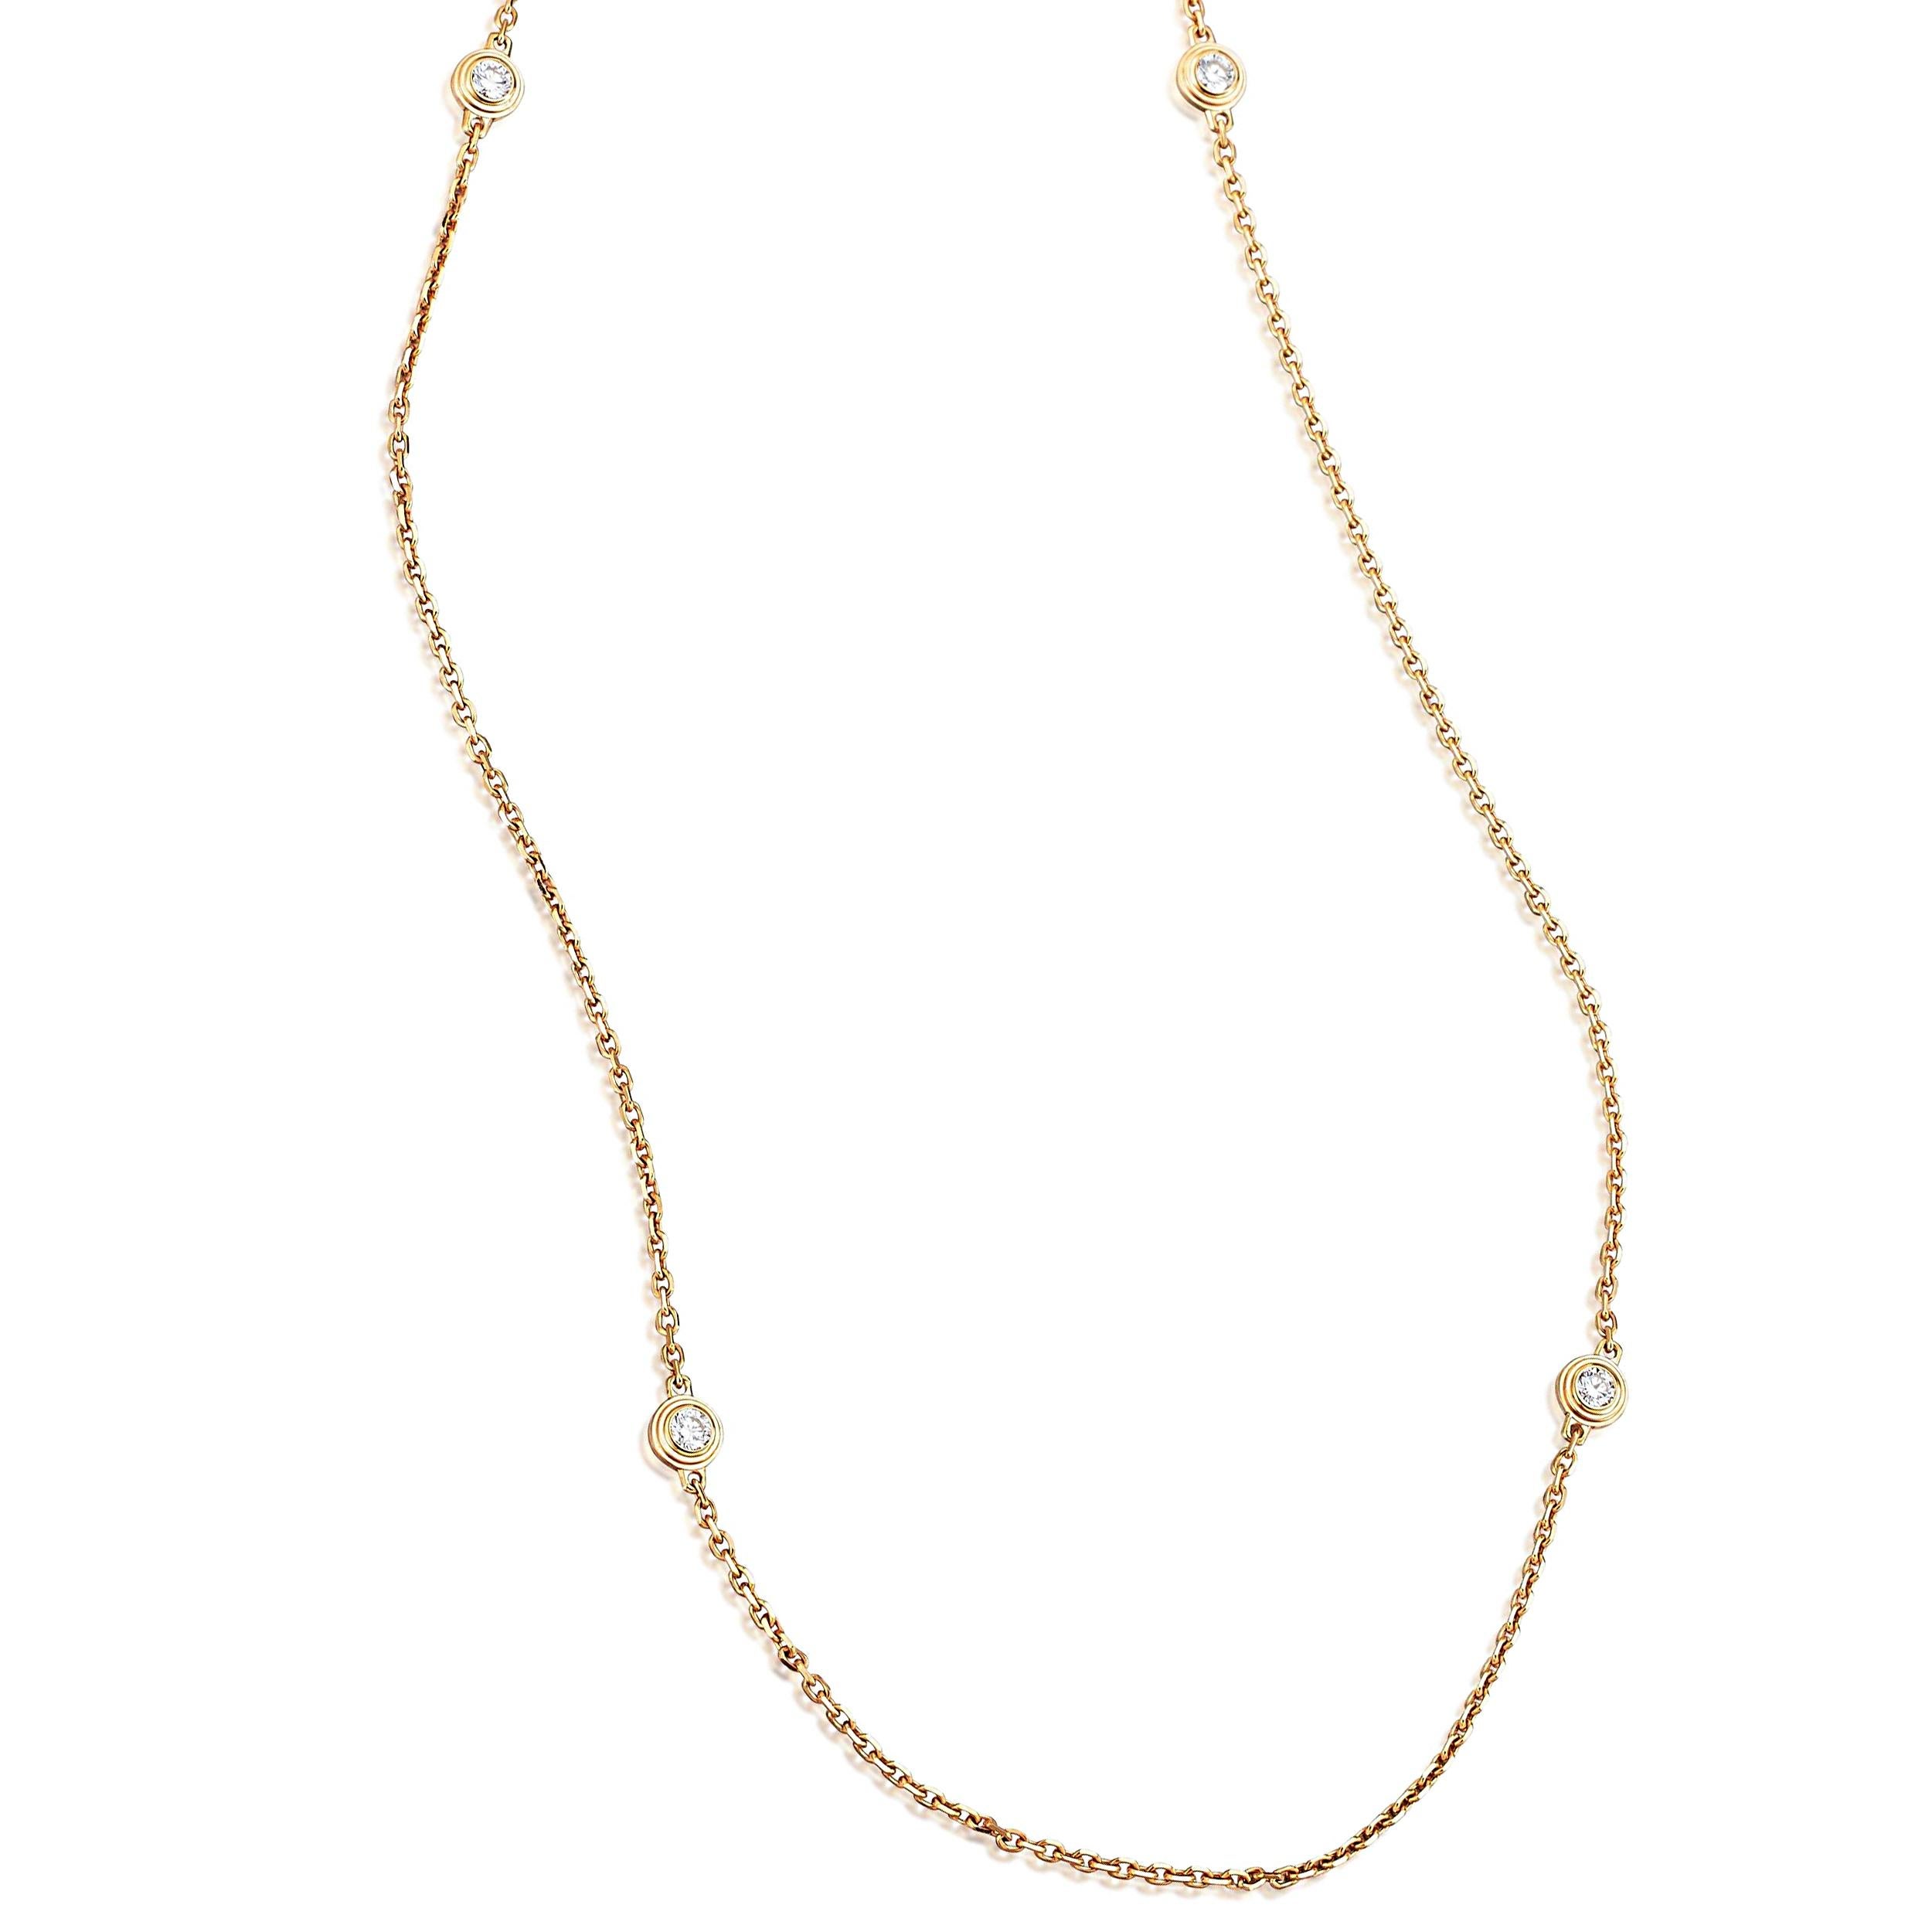 Crafted with precision and care, this sautoir necklace measures an impressive 34.65 inches in length, offering a versatile and sophisticated accessory that can be draped elegantly across the chest or layered for a more contemporary look. The